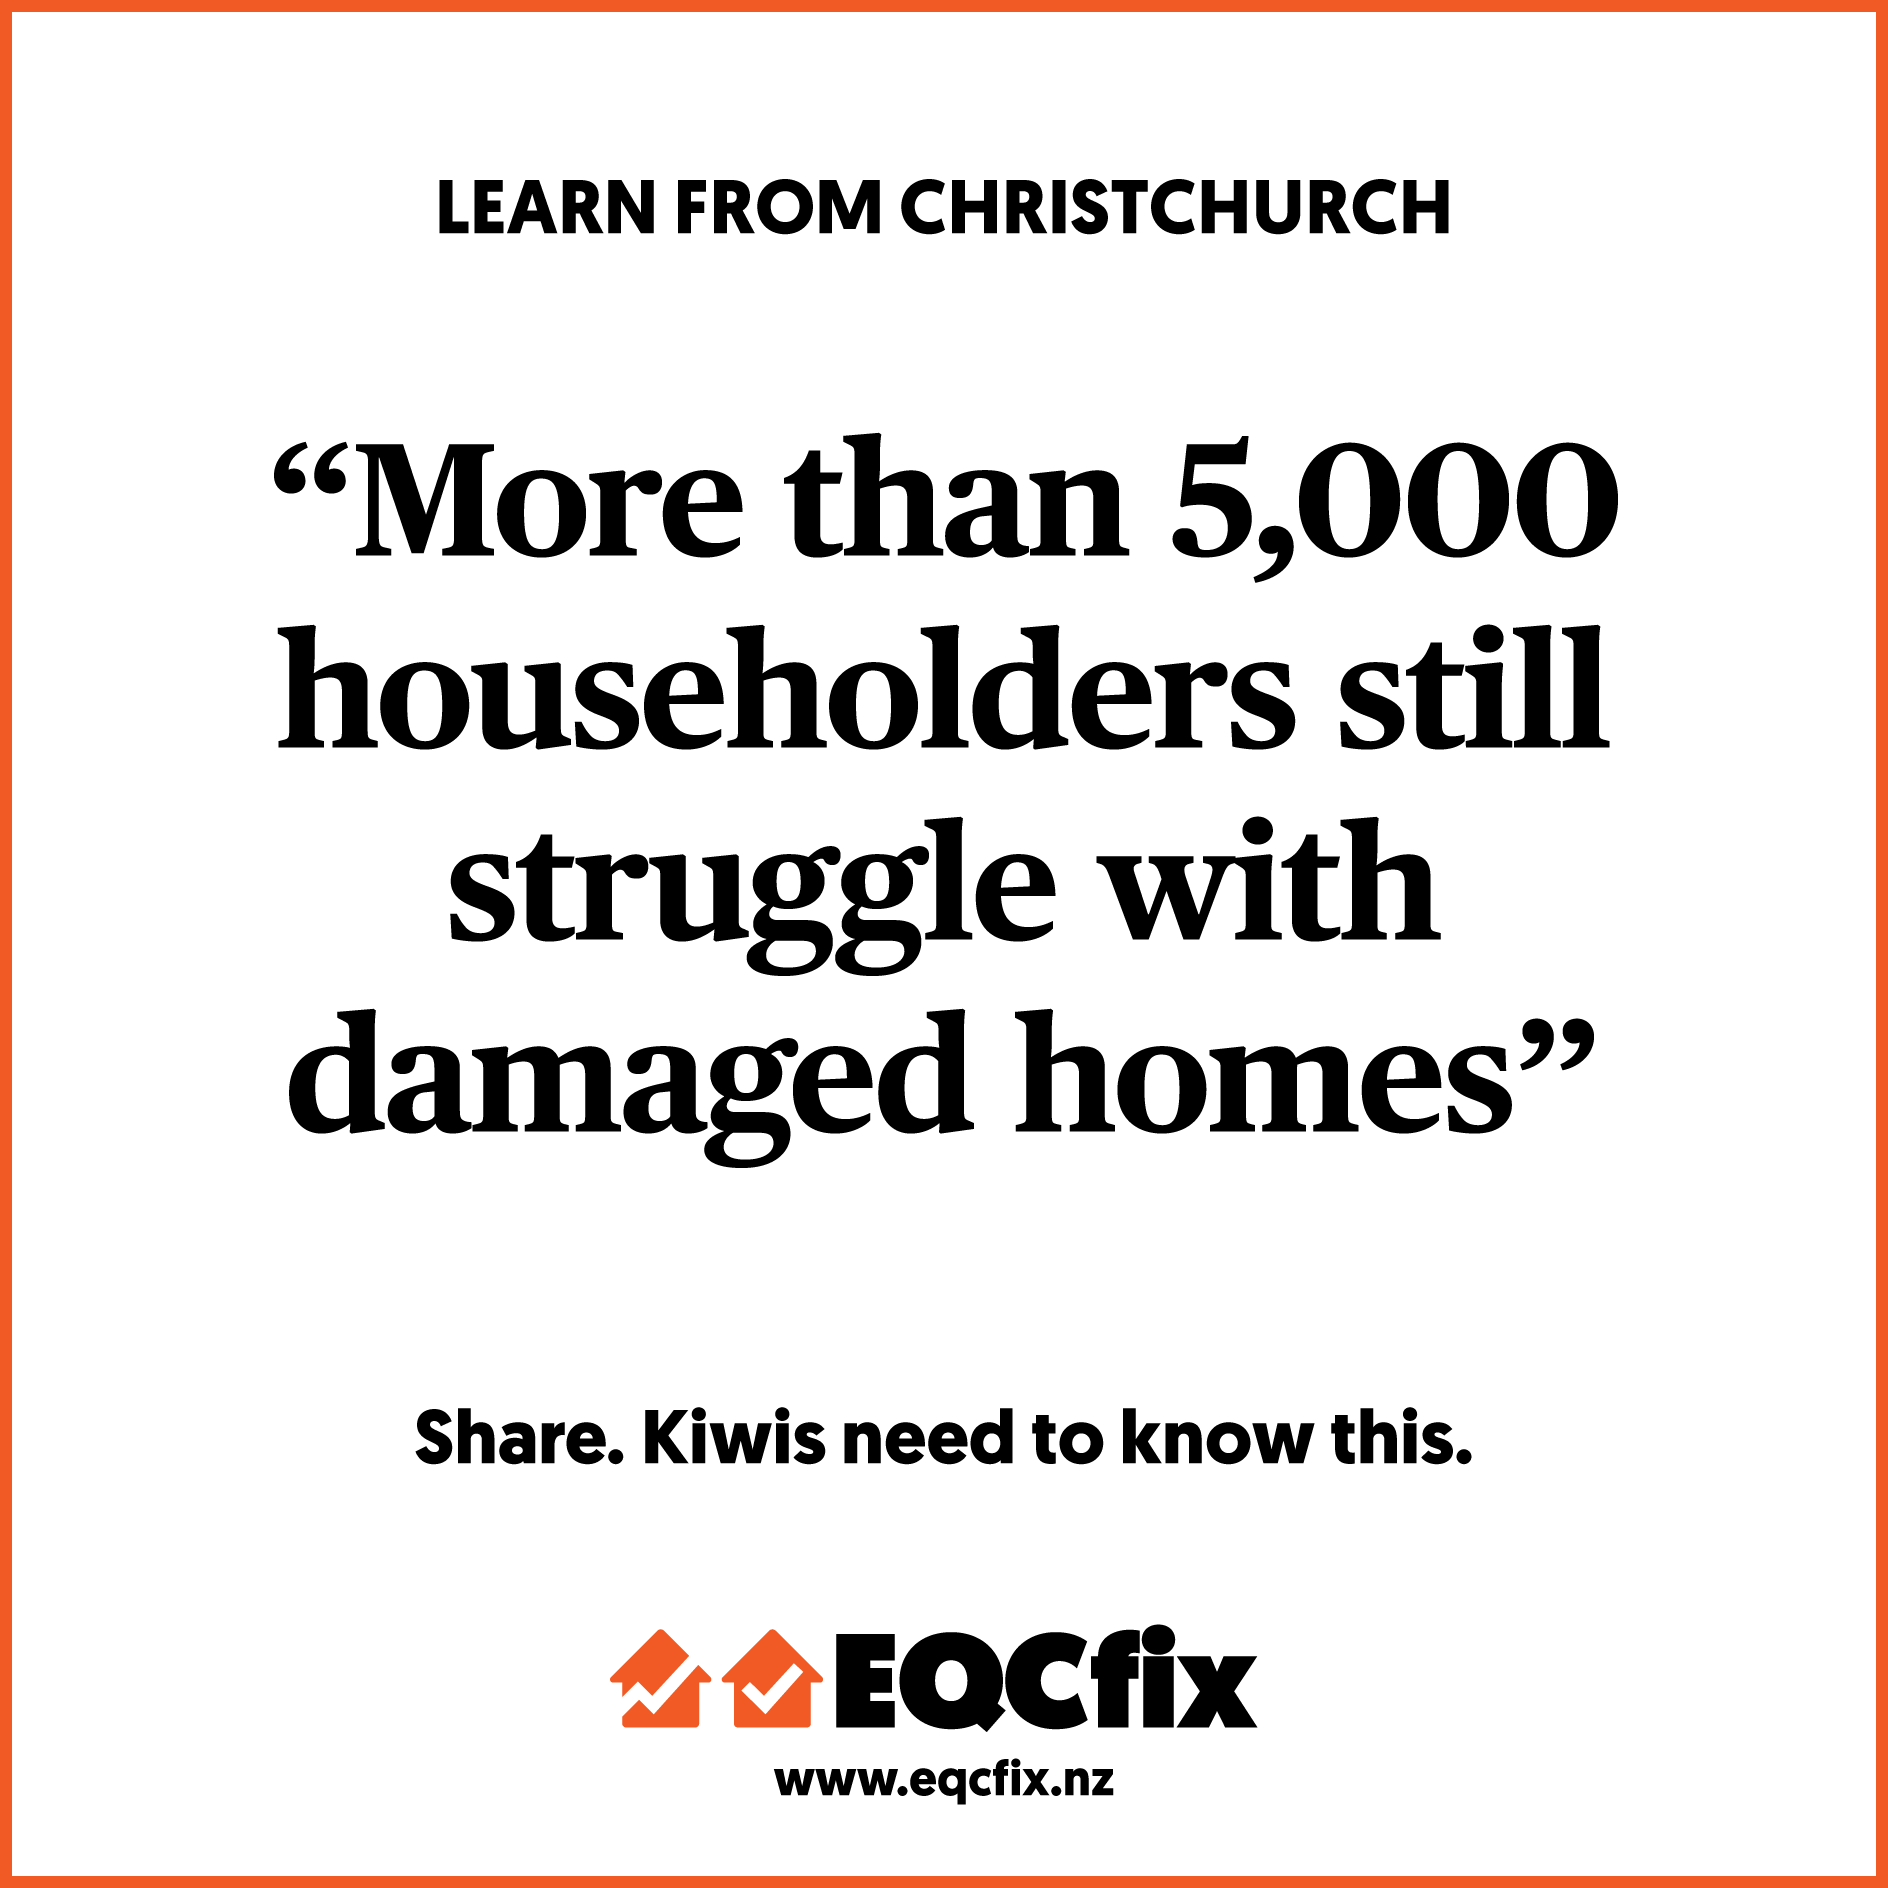 MORE THAN 5,000 HOUSEHOLDERS STILL STRUGGLE. THIS IS NOT OK.